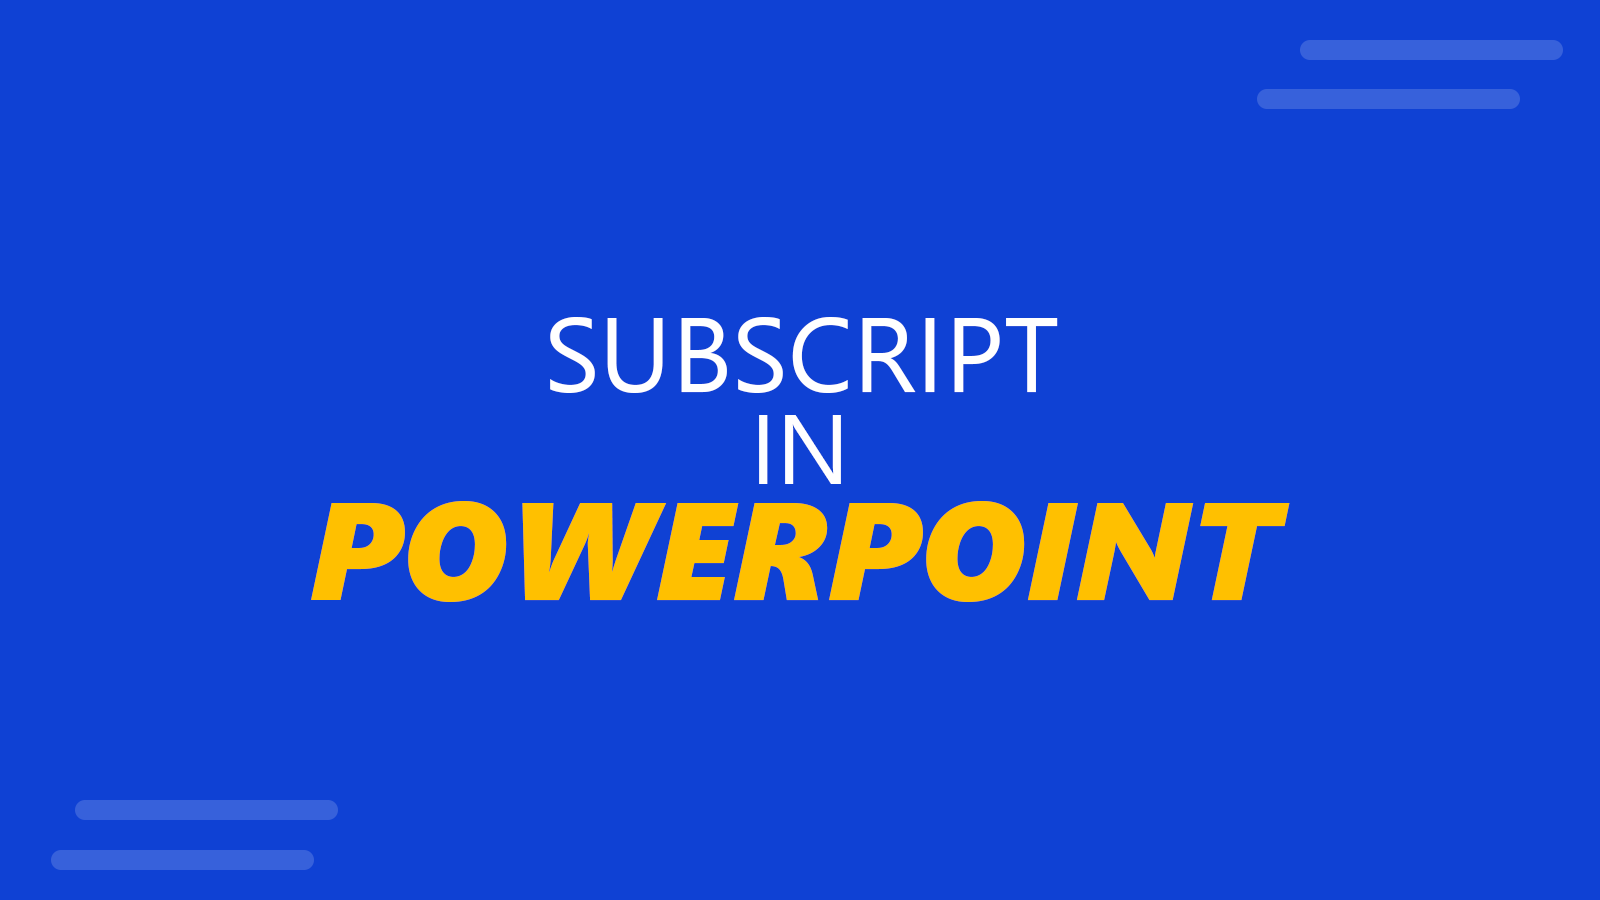 How to Apply Subscript in PowerPoint - Practical way to use subscript in PowerPoint